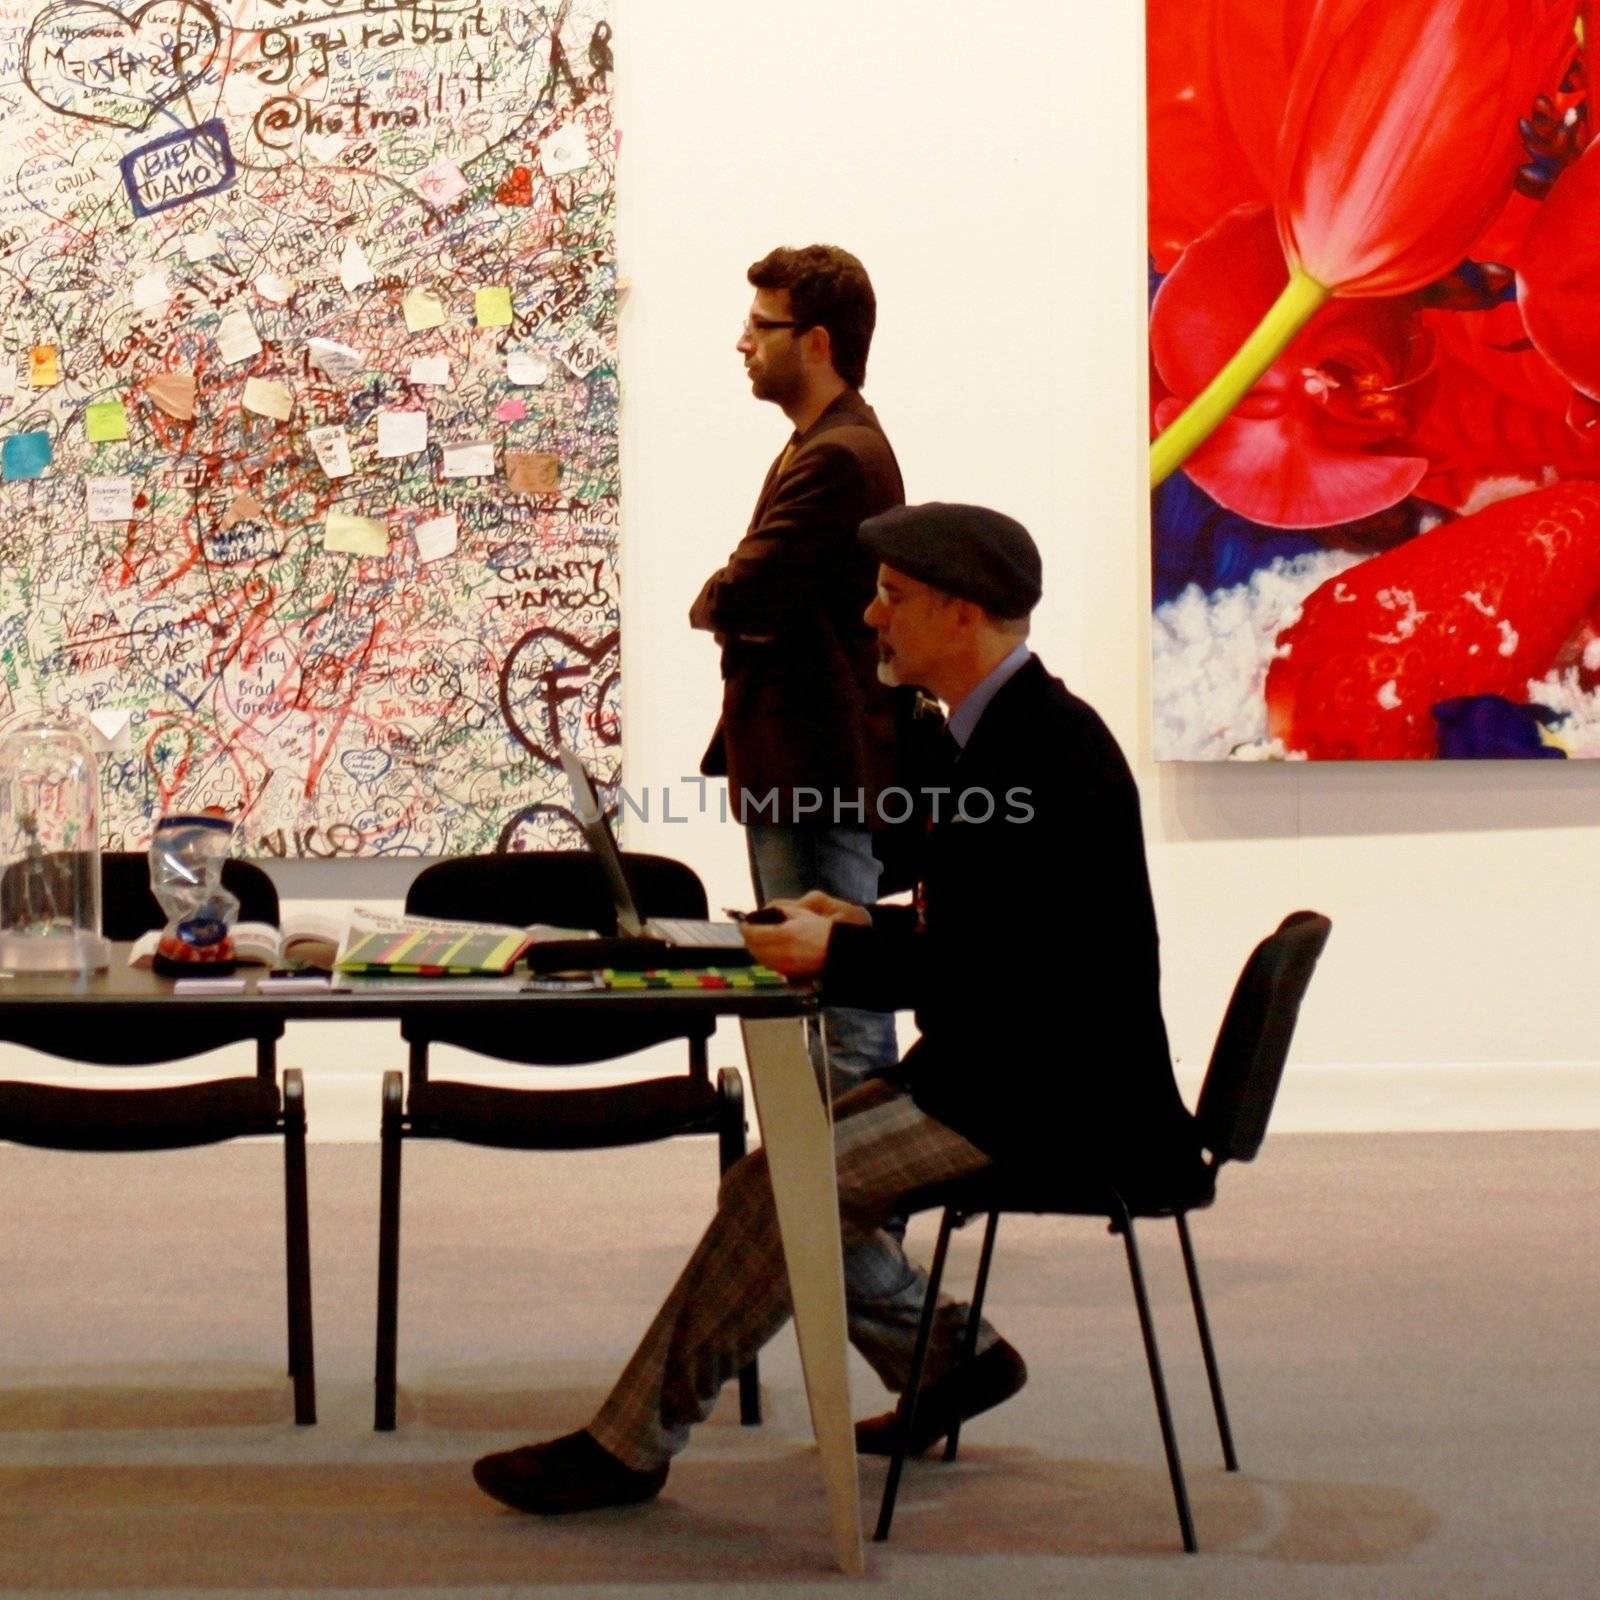 People visit art galleries at MiArt ArtNow, international exhibition of modern and contemporary art in Milan, Italy.